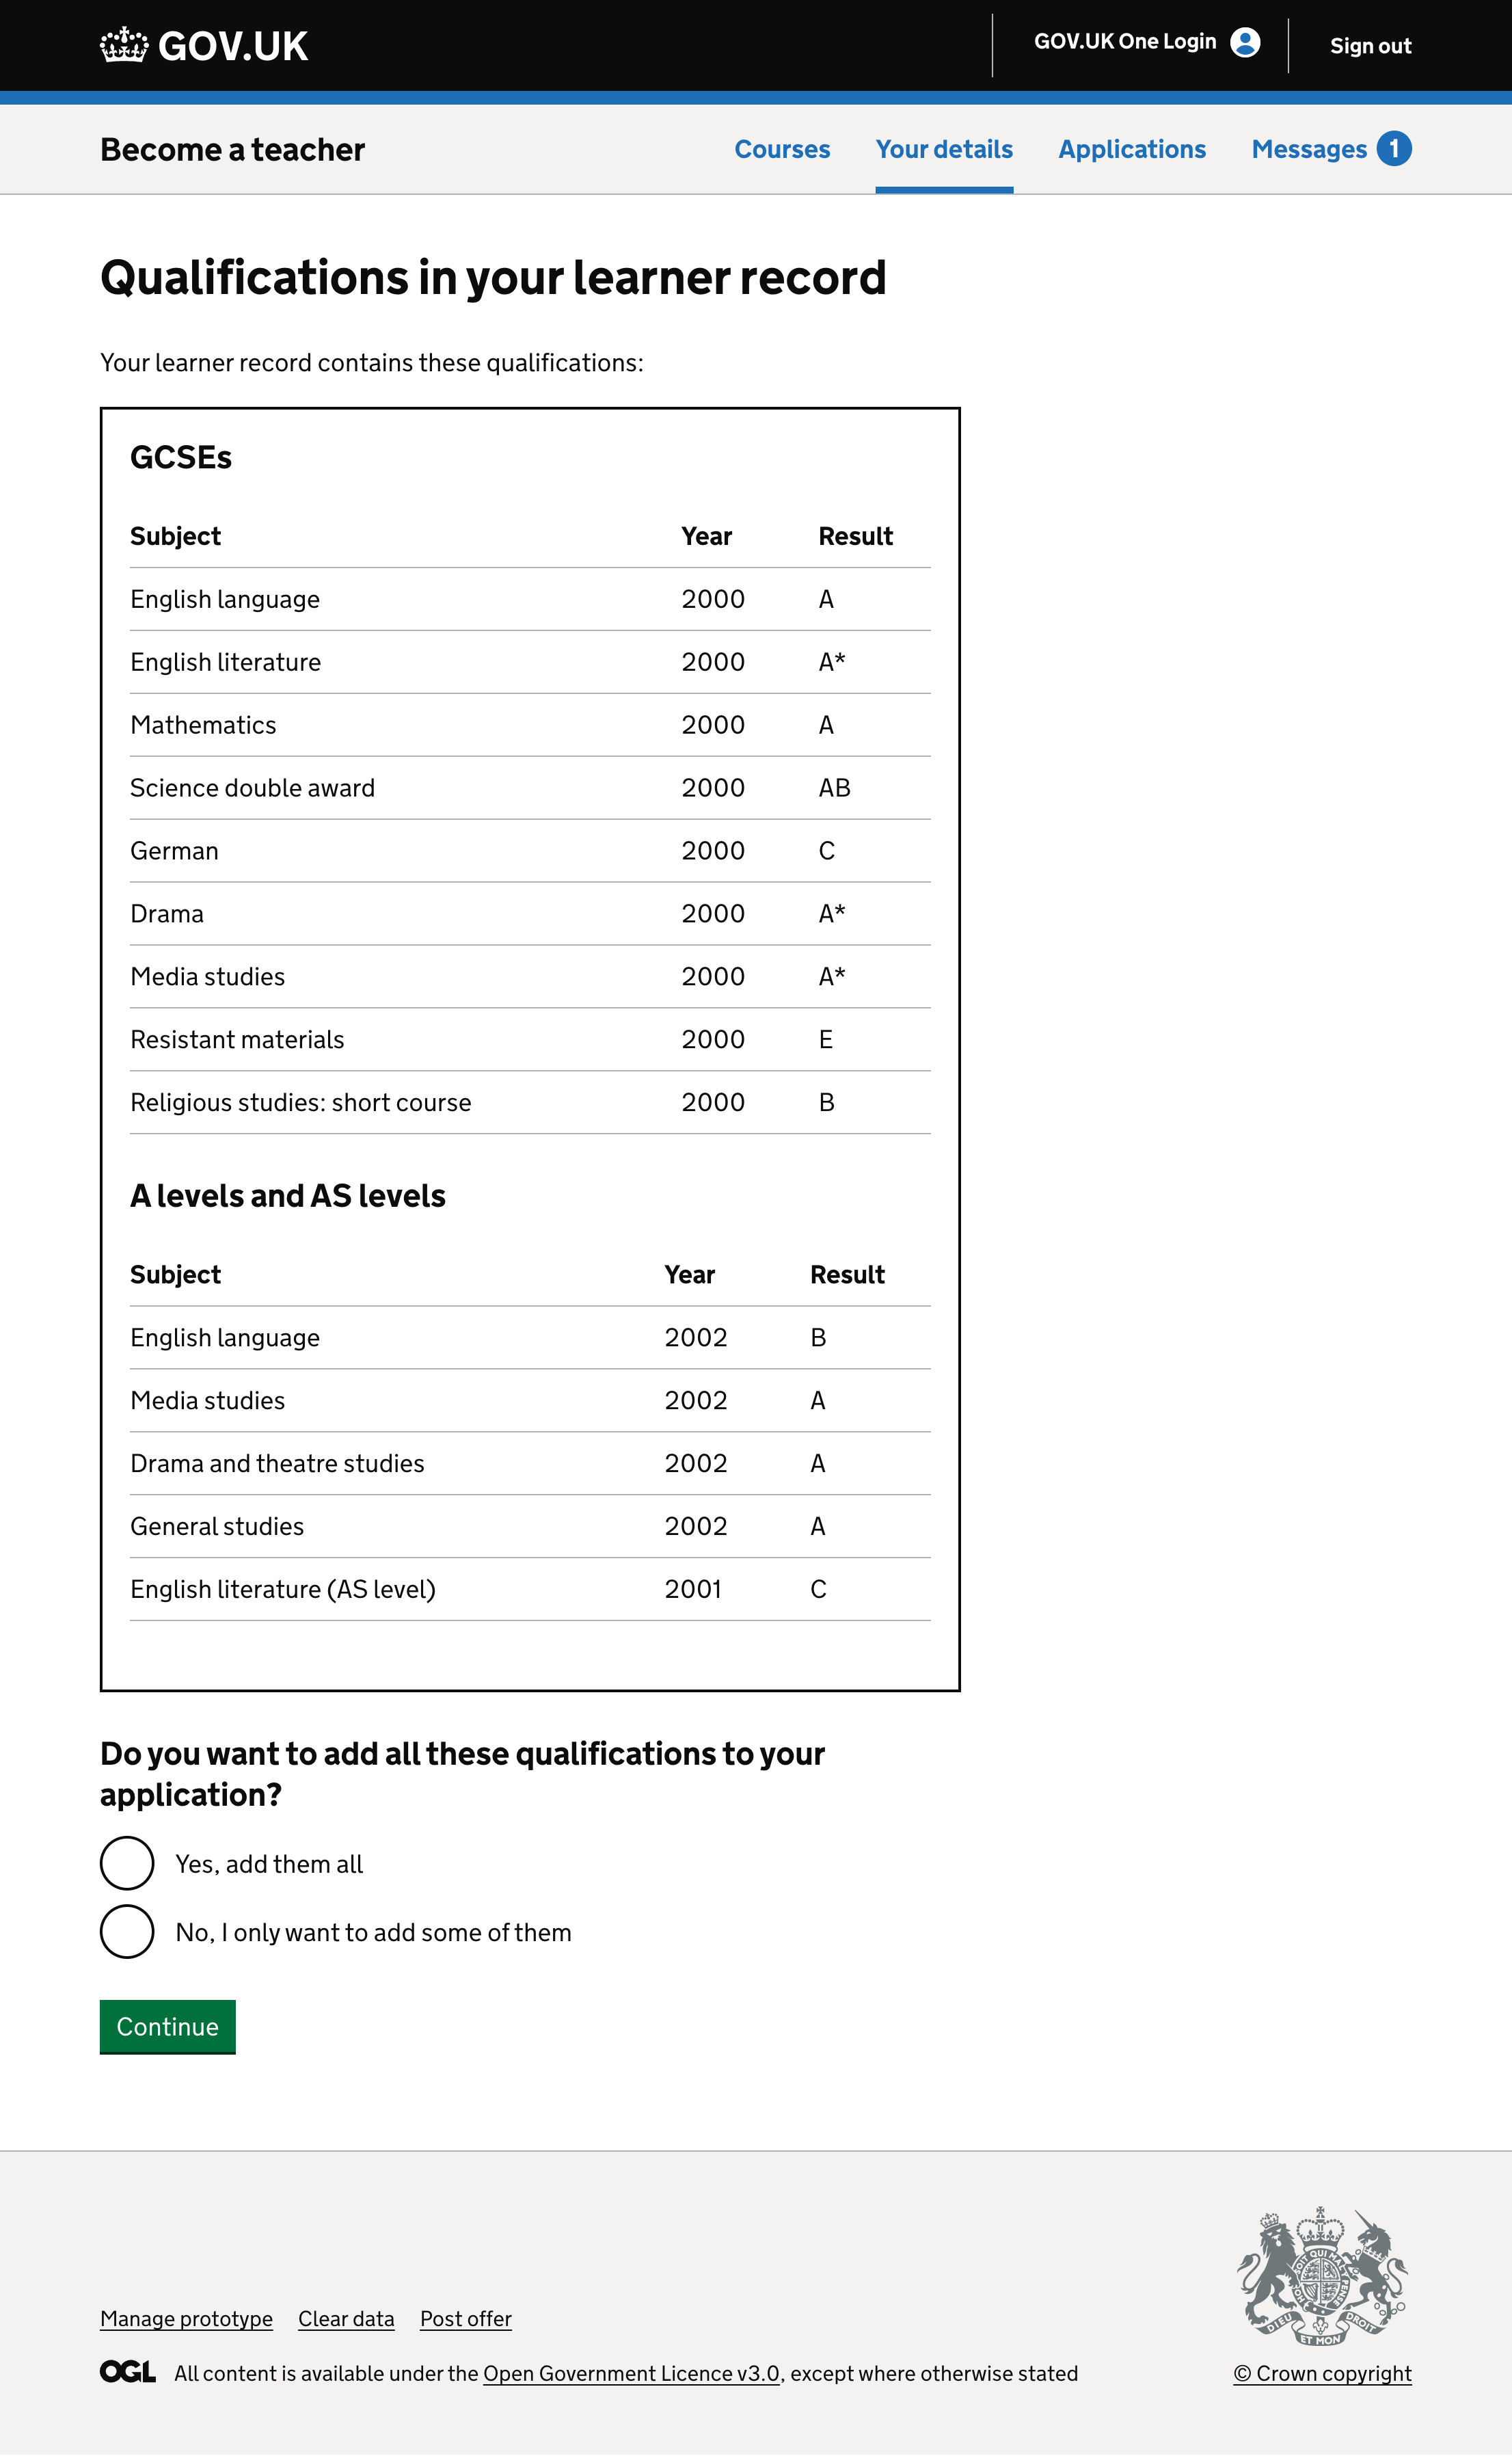 Screenshot showing a page listing GCSE and A level qualifications imported from the learner record